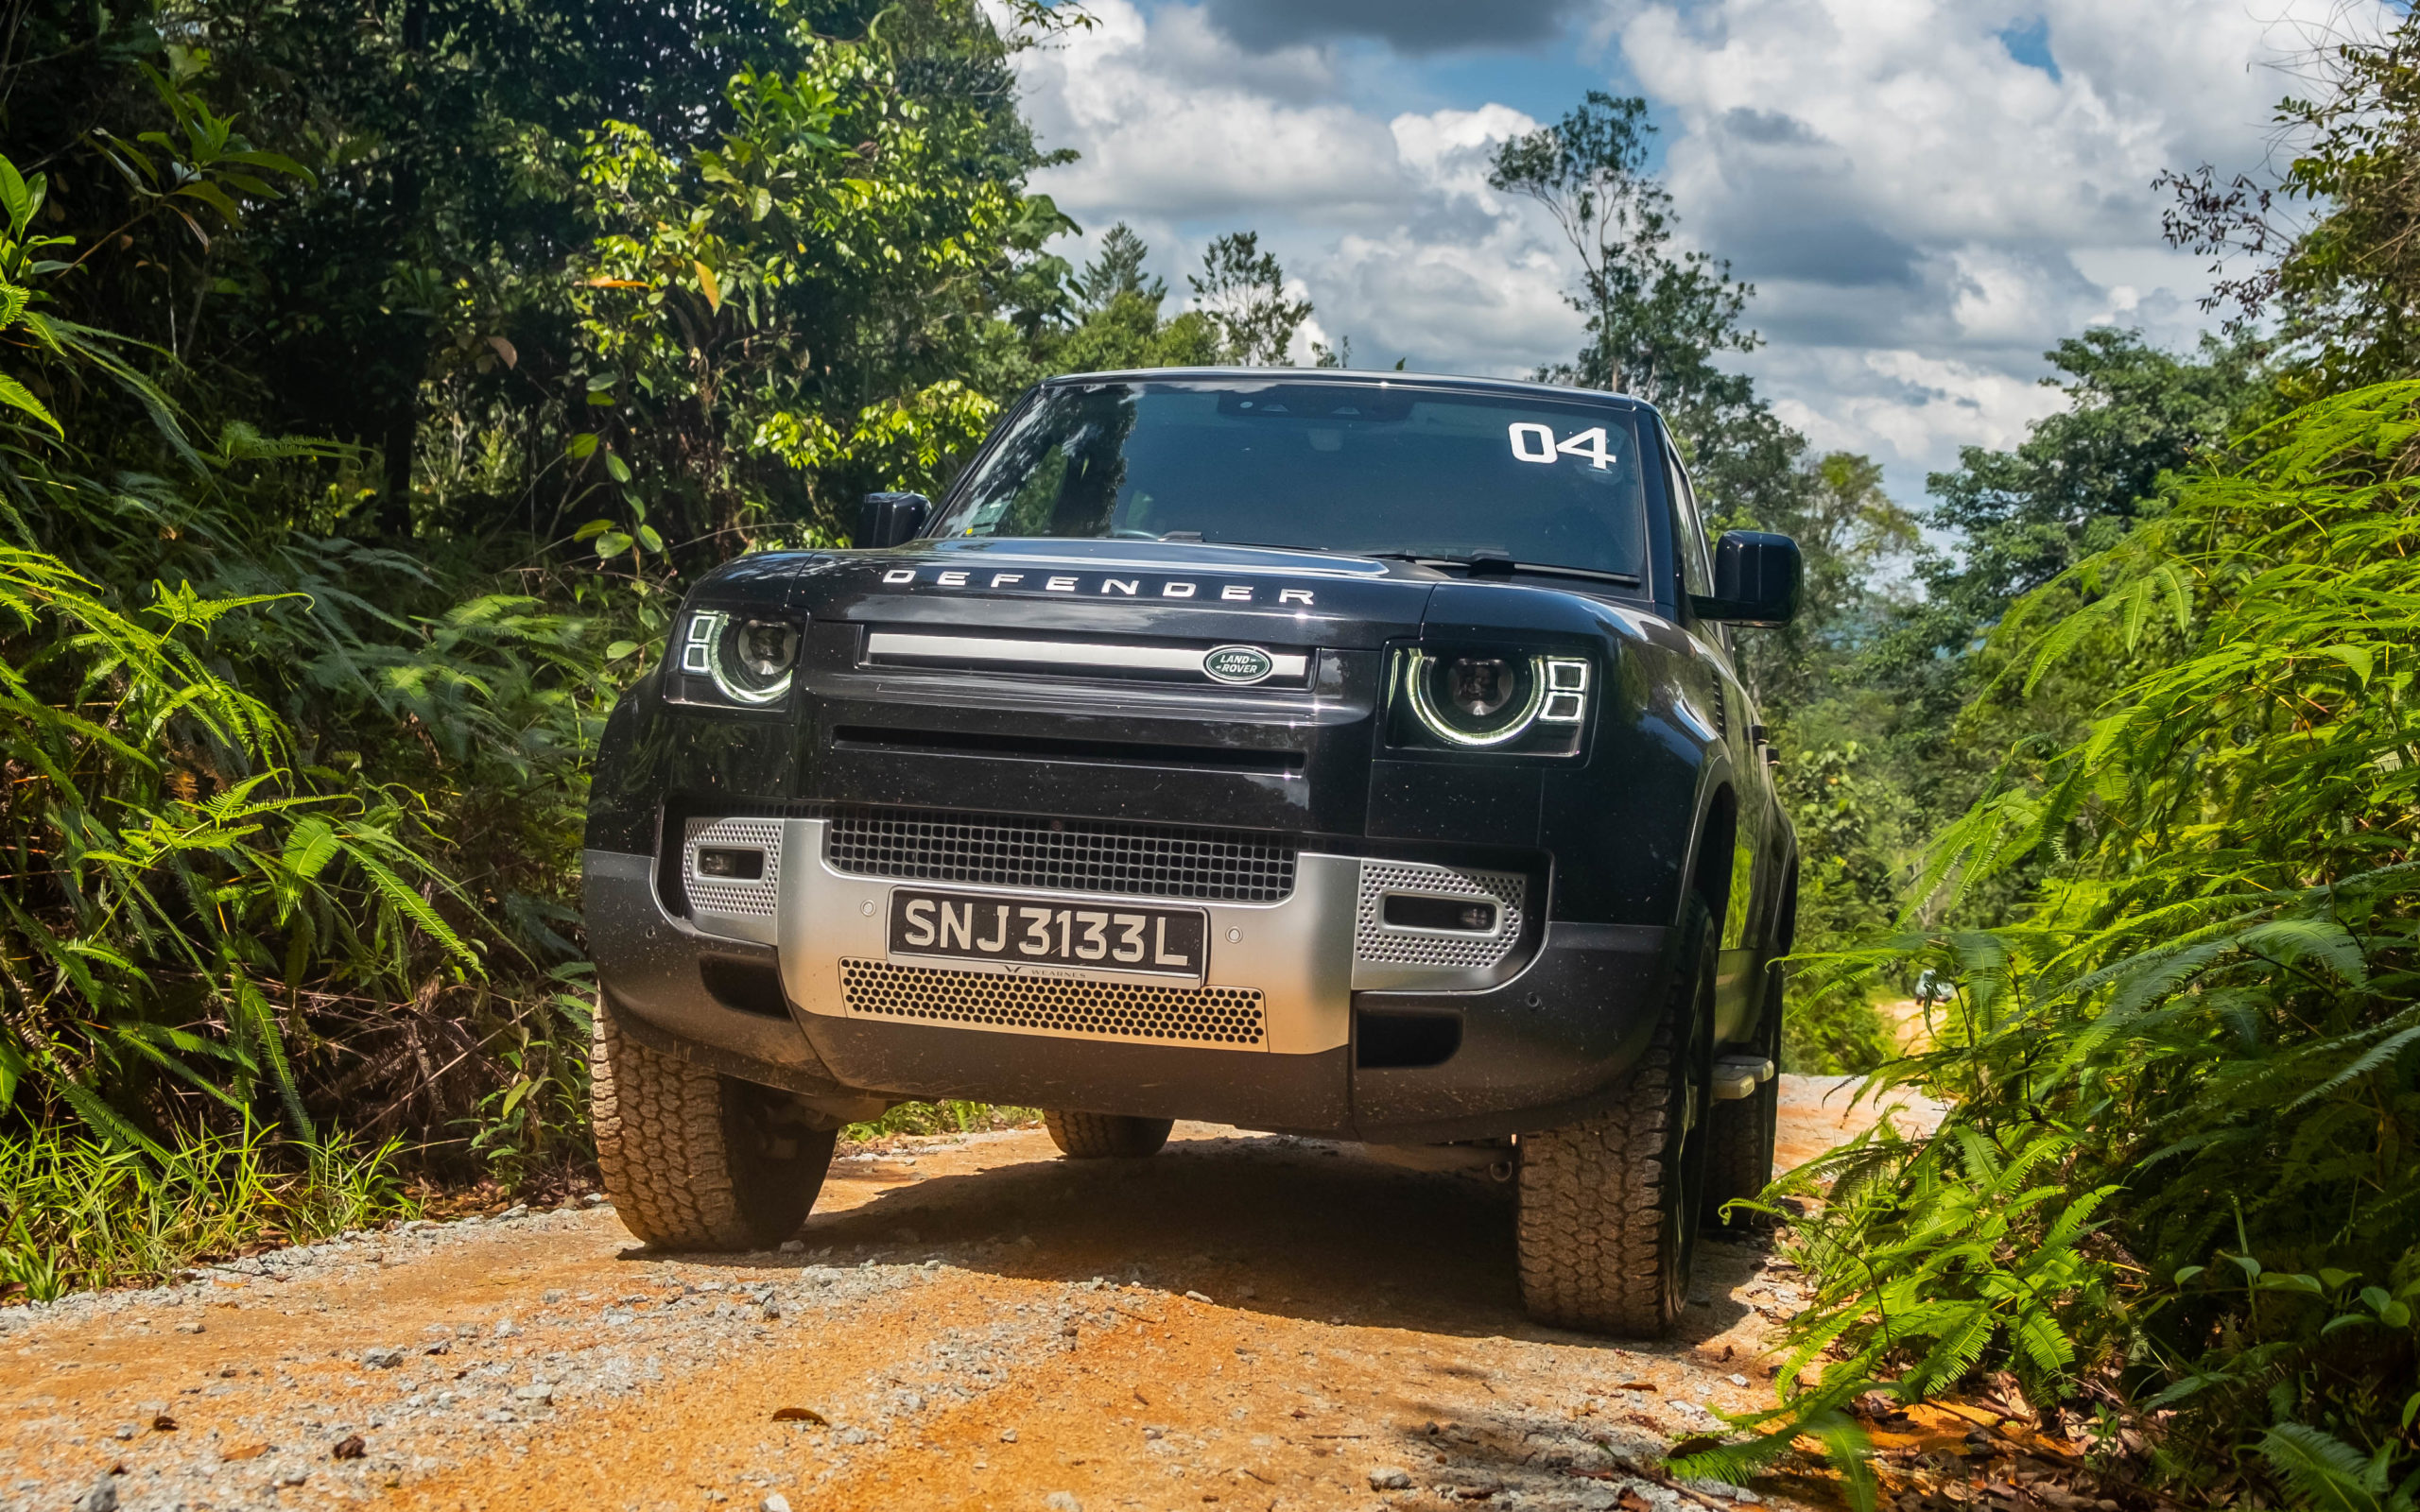 defending its title: the new land rover defender shows us how it's done on desaru's dirt trails